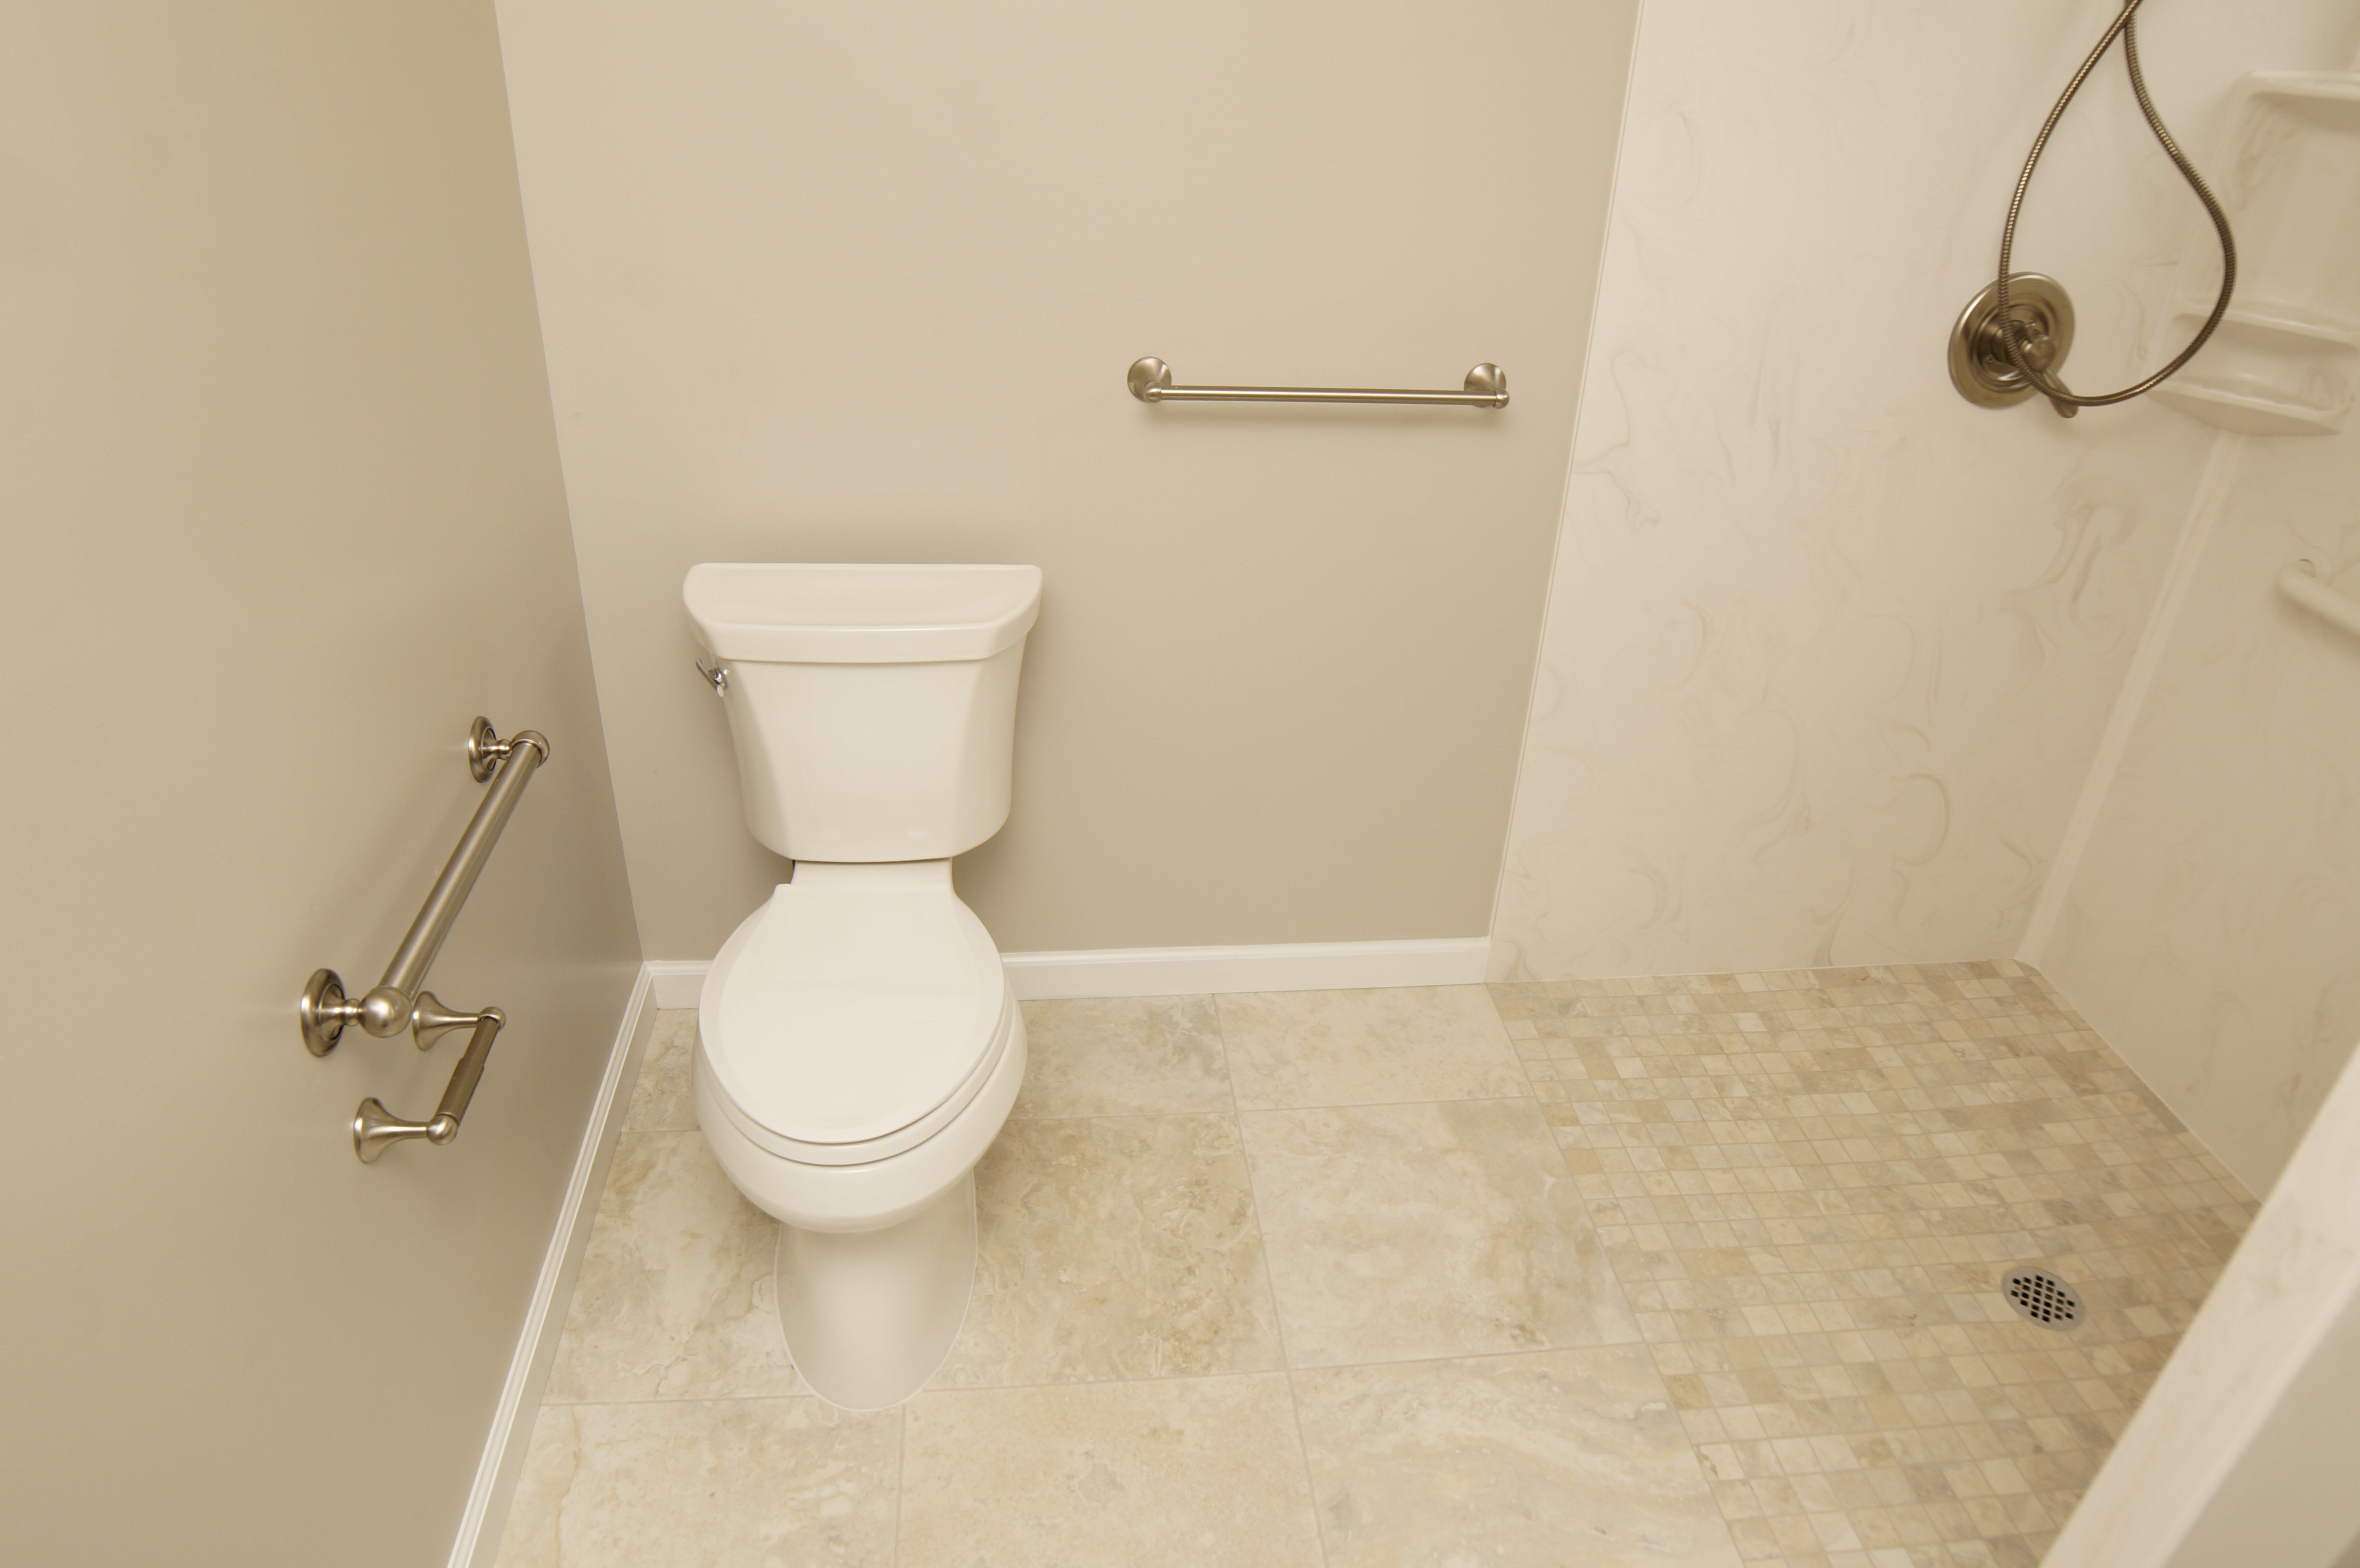 The Aging-in-place bathroom